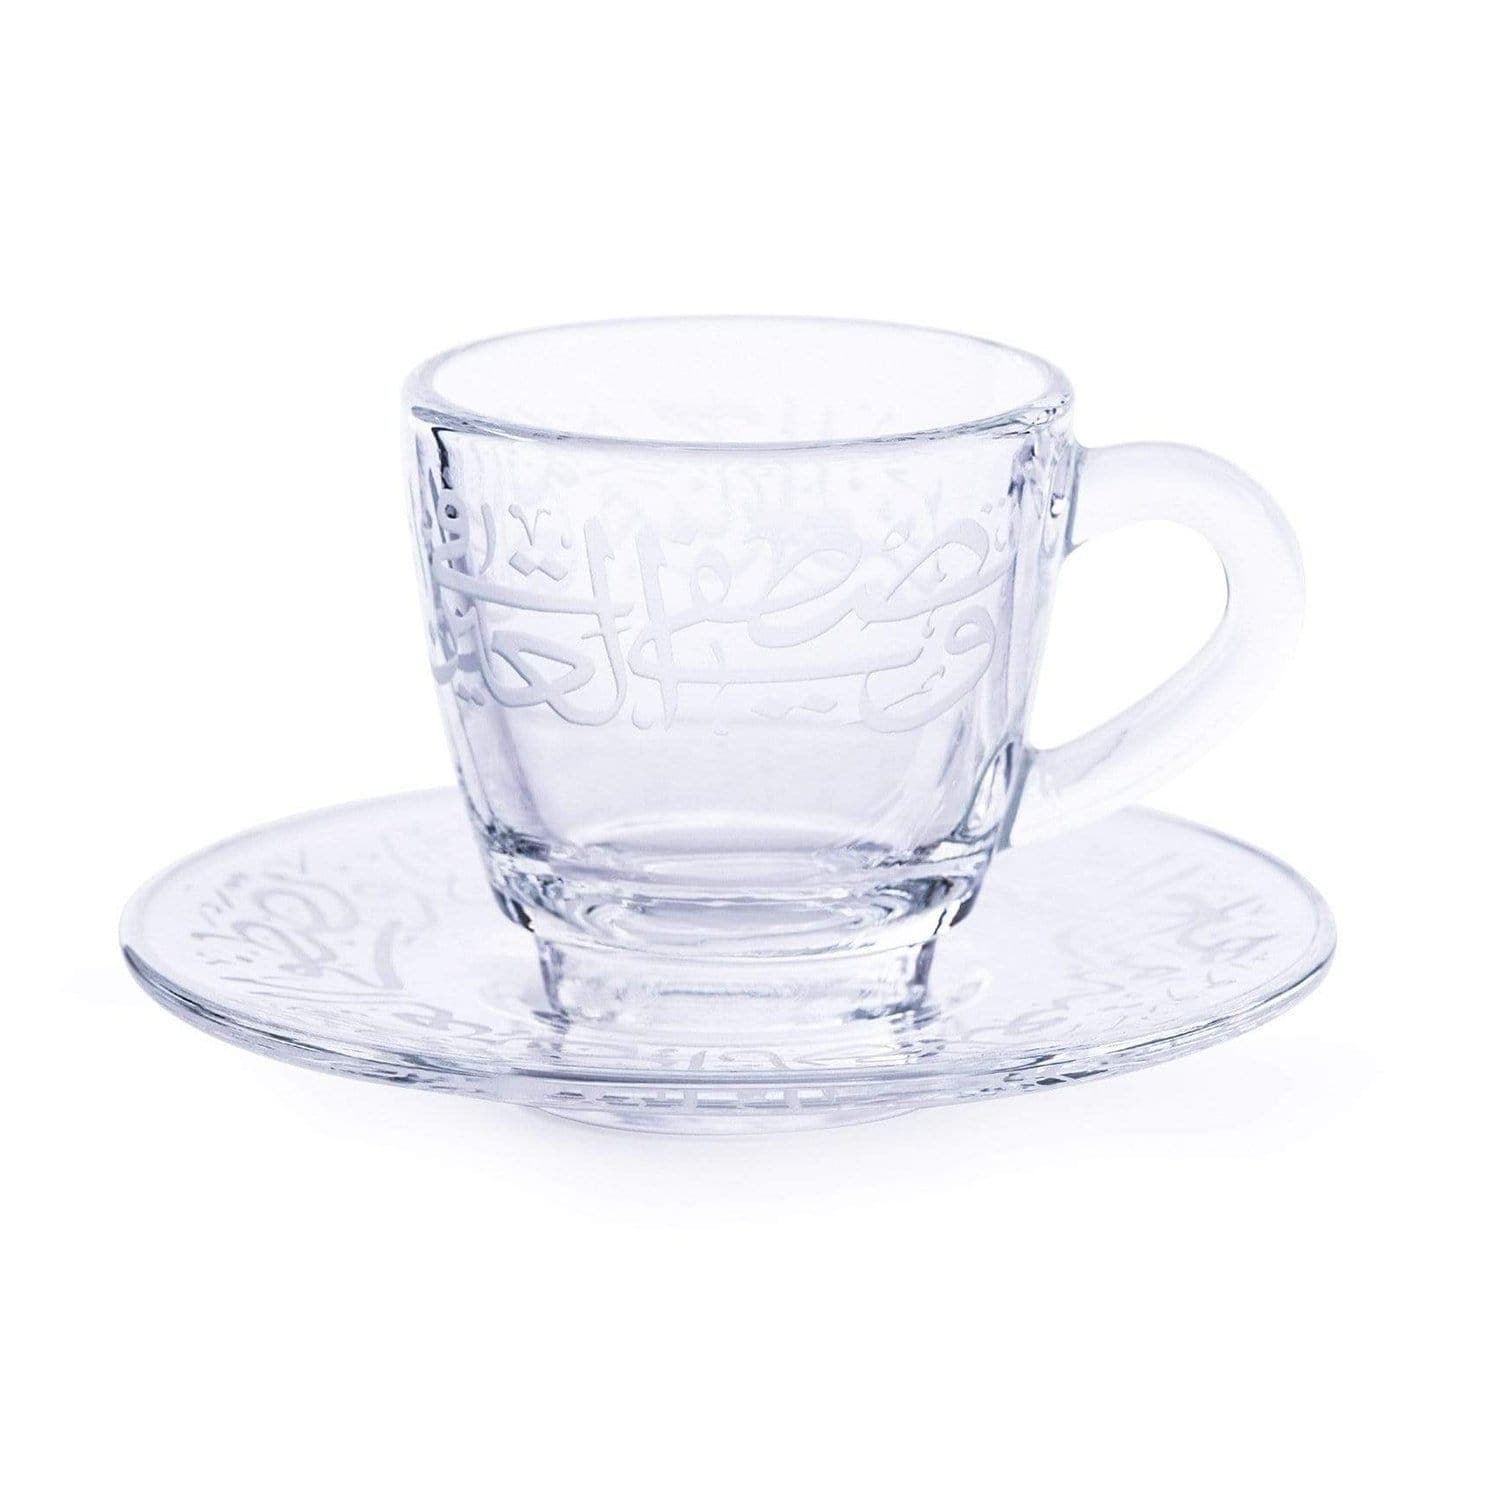 Dimlaj Thuluth Engraved Coffee Cup and Saucer - Set of 12 - 21158 - Jashanmal Home